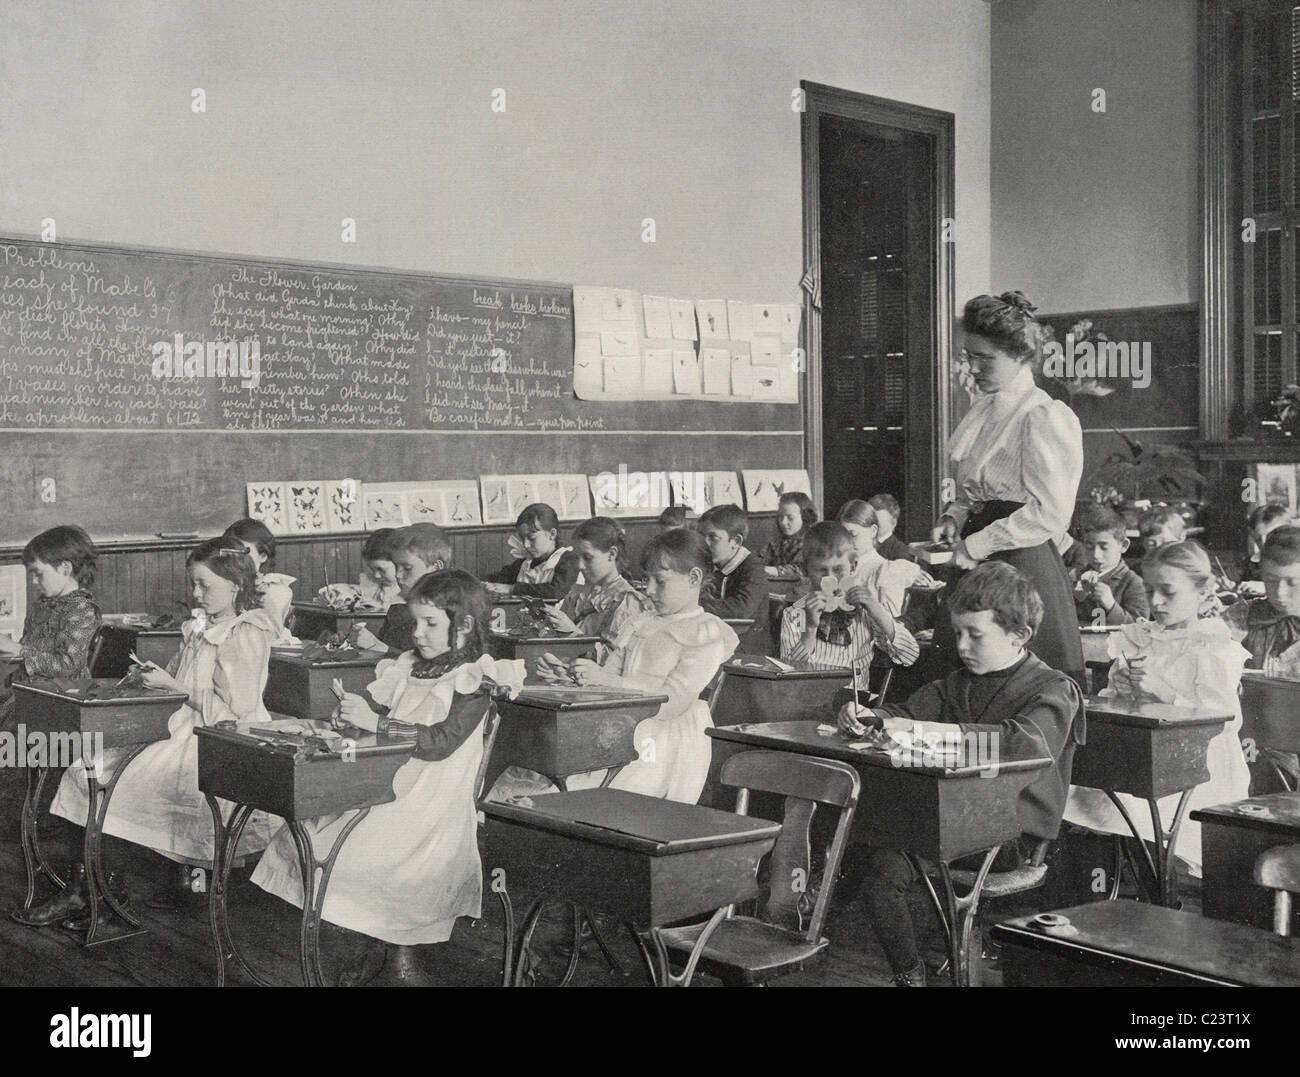 Historic photo of a group of Victorian Era school children cutting paper into leaf shapes, as their teacher looks on. Stock Photo